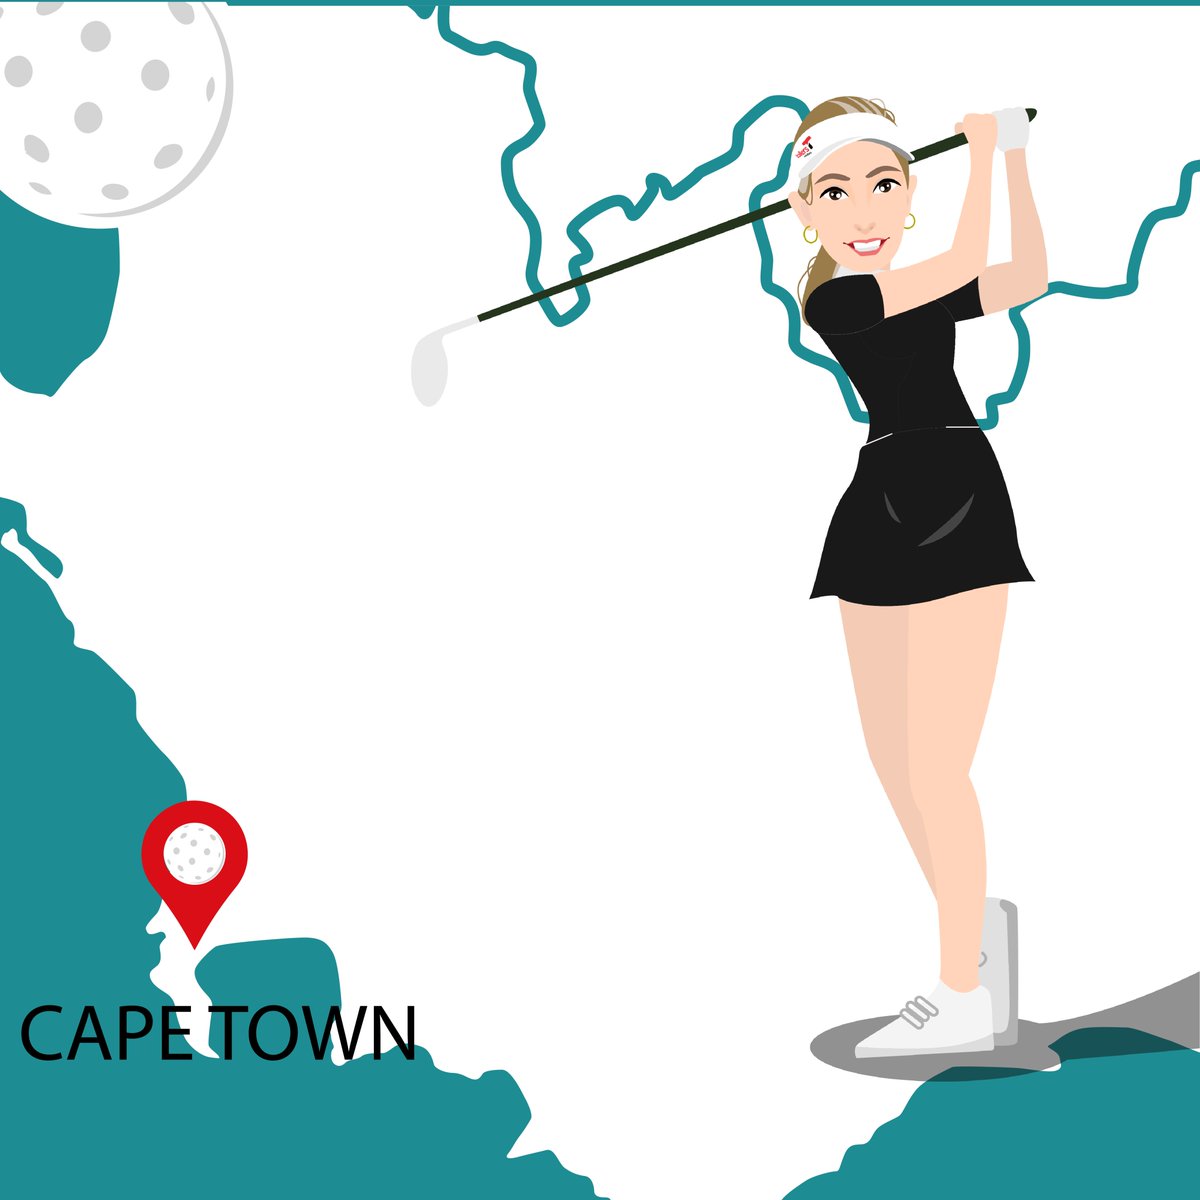 Where’s Lauren? This week sees @lauren_taylor94 completing in the @StandardBankZA Ladies Open, part of the @SLadiesTour being held at the @royalcapegolf. This course is South Africa’s oldest & most prestigious, set against the backdrop of Table Mountain. Good Luck Lauren!